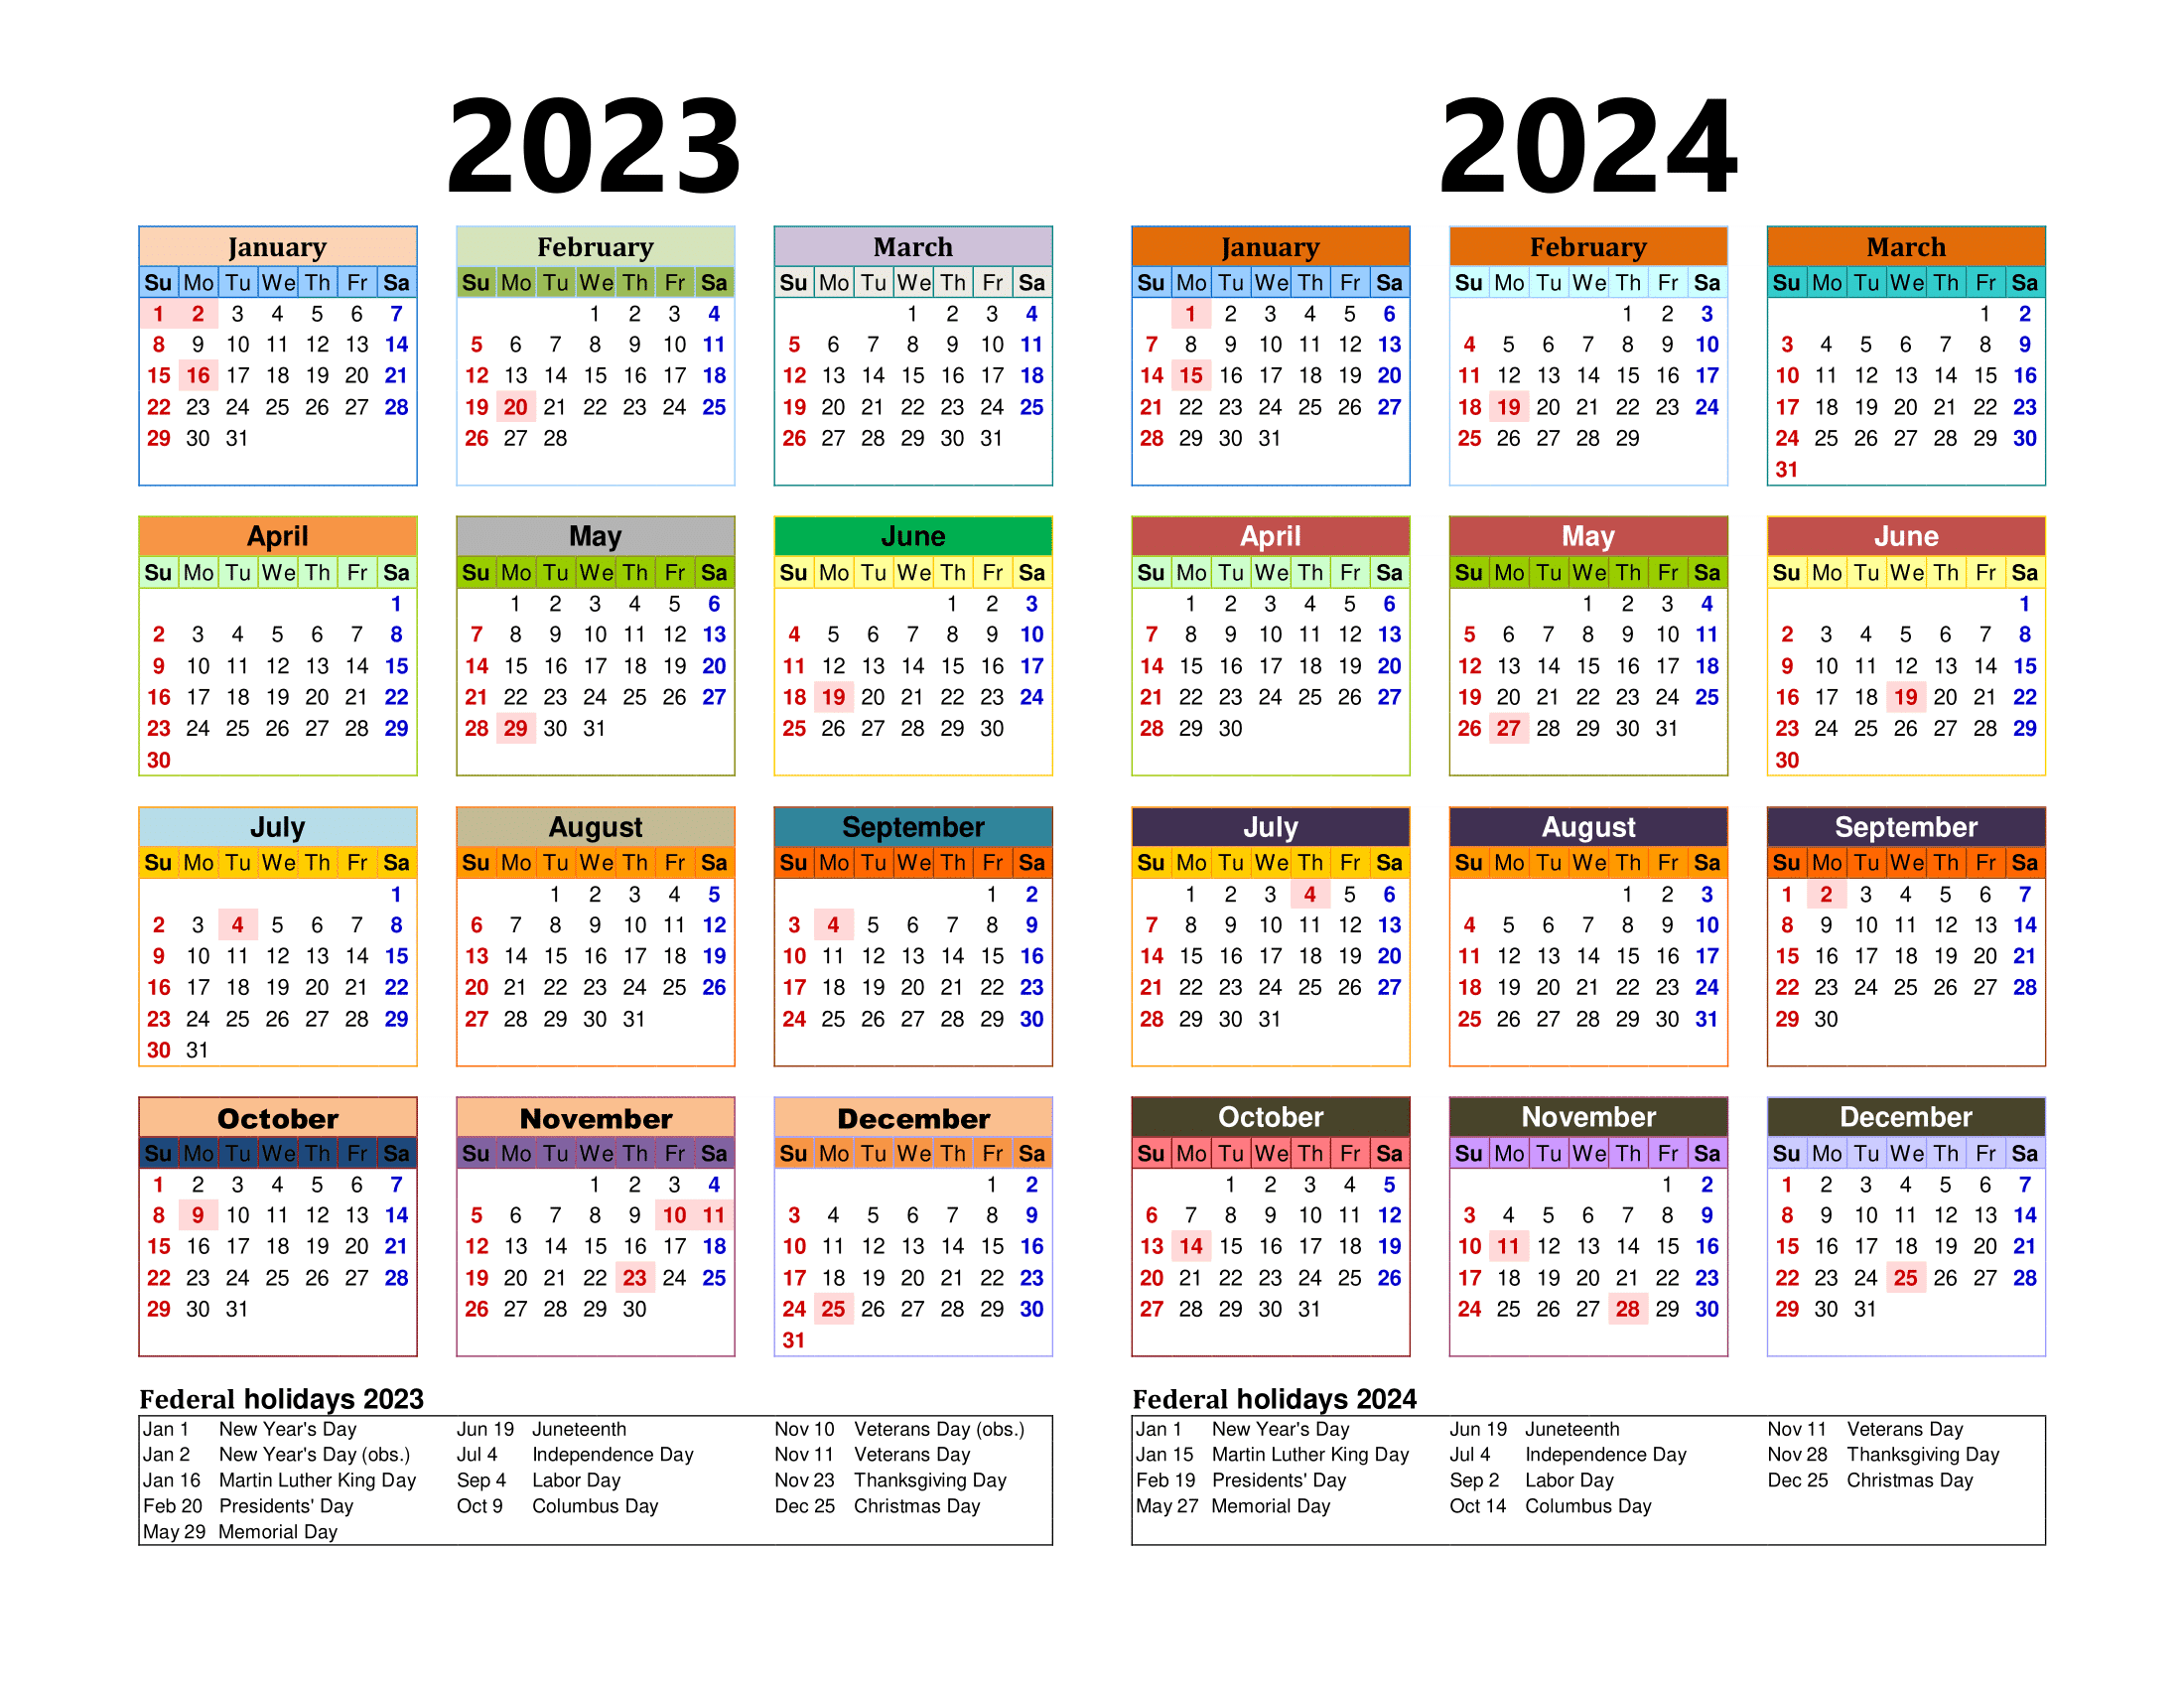 Free Printable Two Year Calendar Templates For 2023 And 2024 In Pdf for 2023 And 2024 Calendar Printable